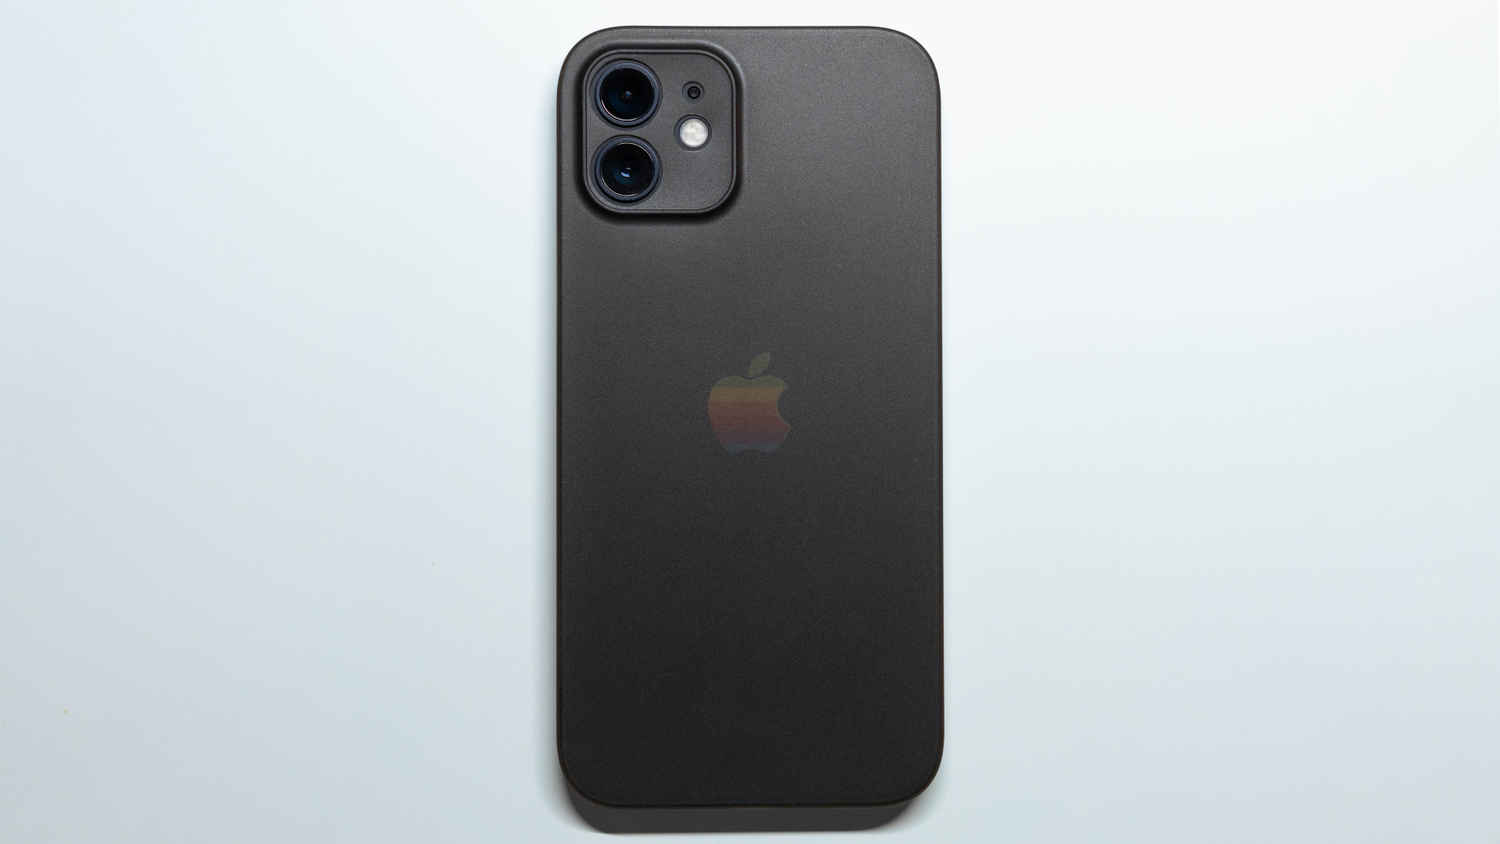 iPhone 16 design update! We might see a new camera button and more